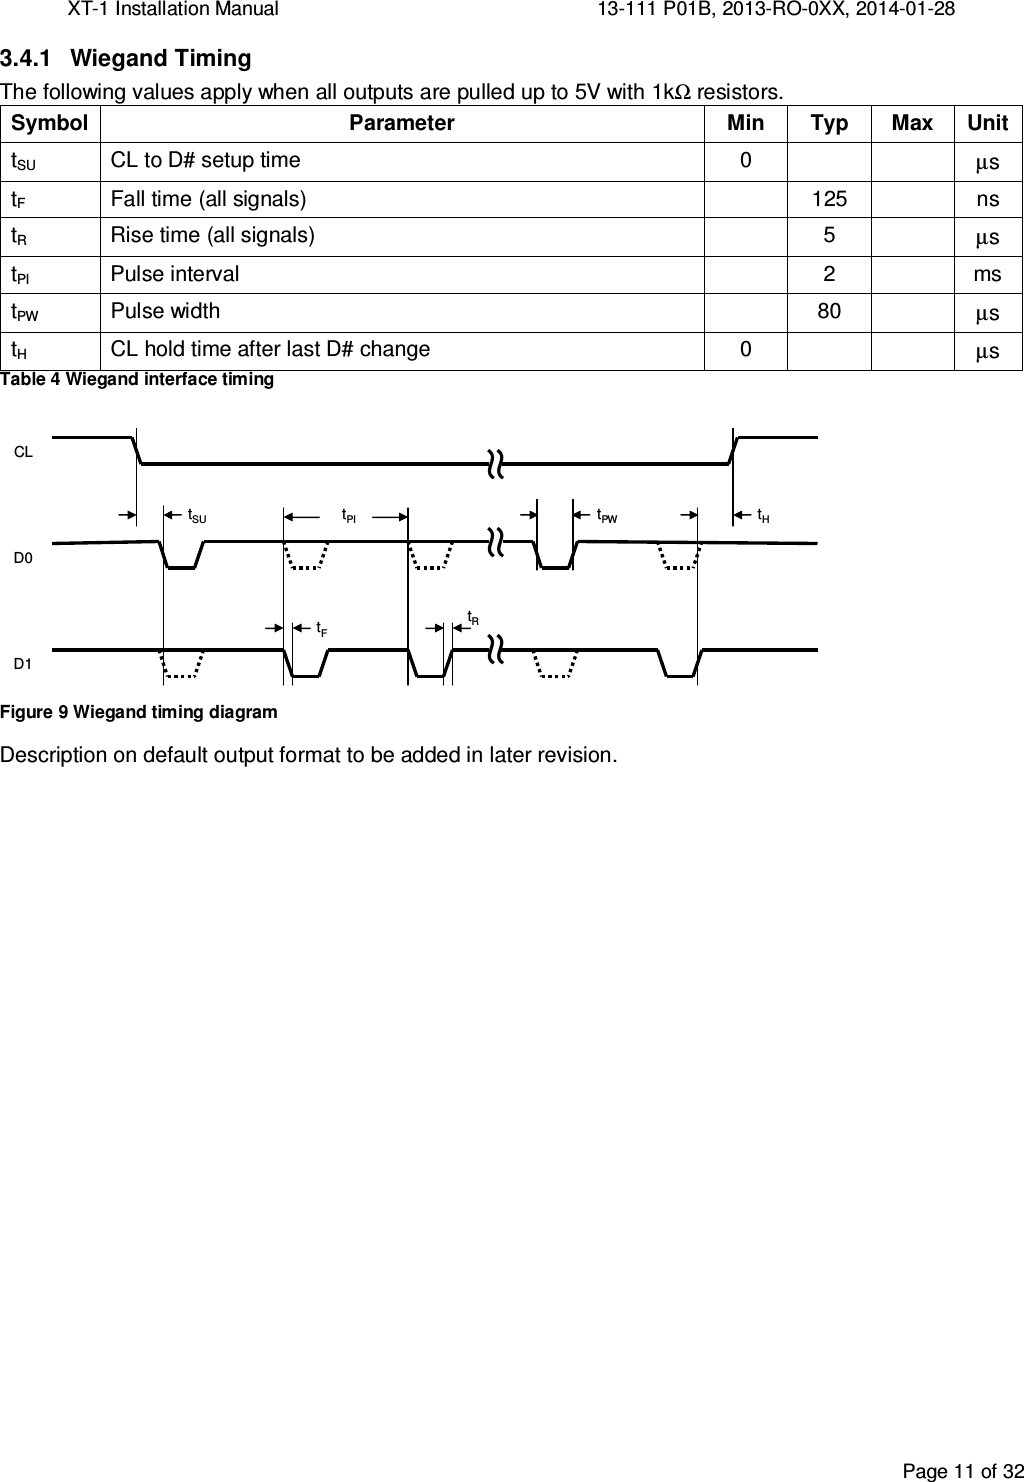 XT-1 Installation Manual     13-111 P01B, 2013-RO-0XX, 2014-01-28  Page 11 of 32  3.4.1  Wiegand Timing The following values apply when all outputs are pulled up to 5V with 1kΩ resistors. Symbol Parameter Min Typ Max Unit tSU  CL to D# setup time  0     µs tF  Fall time (all signals)    125    ns tR  Rise time (all signals)    5    µs tPI  Pulse interval    2    ms tPW Pulse width  80  µs tH CL hold time after last D# change 0   µs Table 4 Wiegand interface timing tSUtPItPWtHtRtFCLD0D1≈ ≈ ≈ Figure 9 Wiegand timing diagram Description on default output format to be added in later revision.   